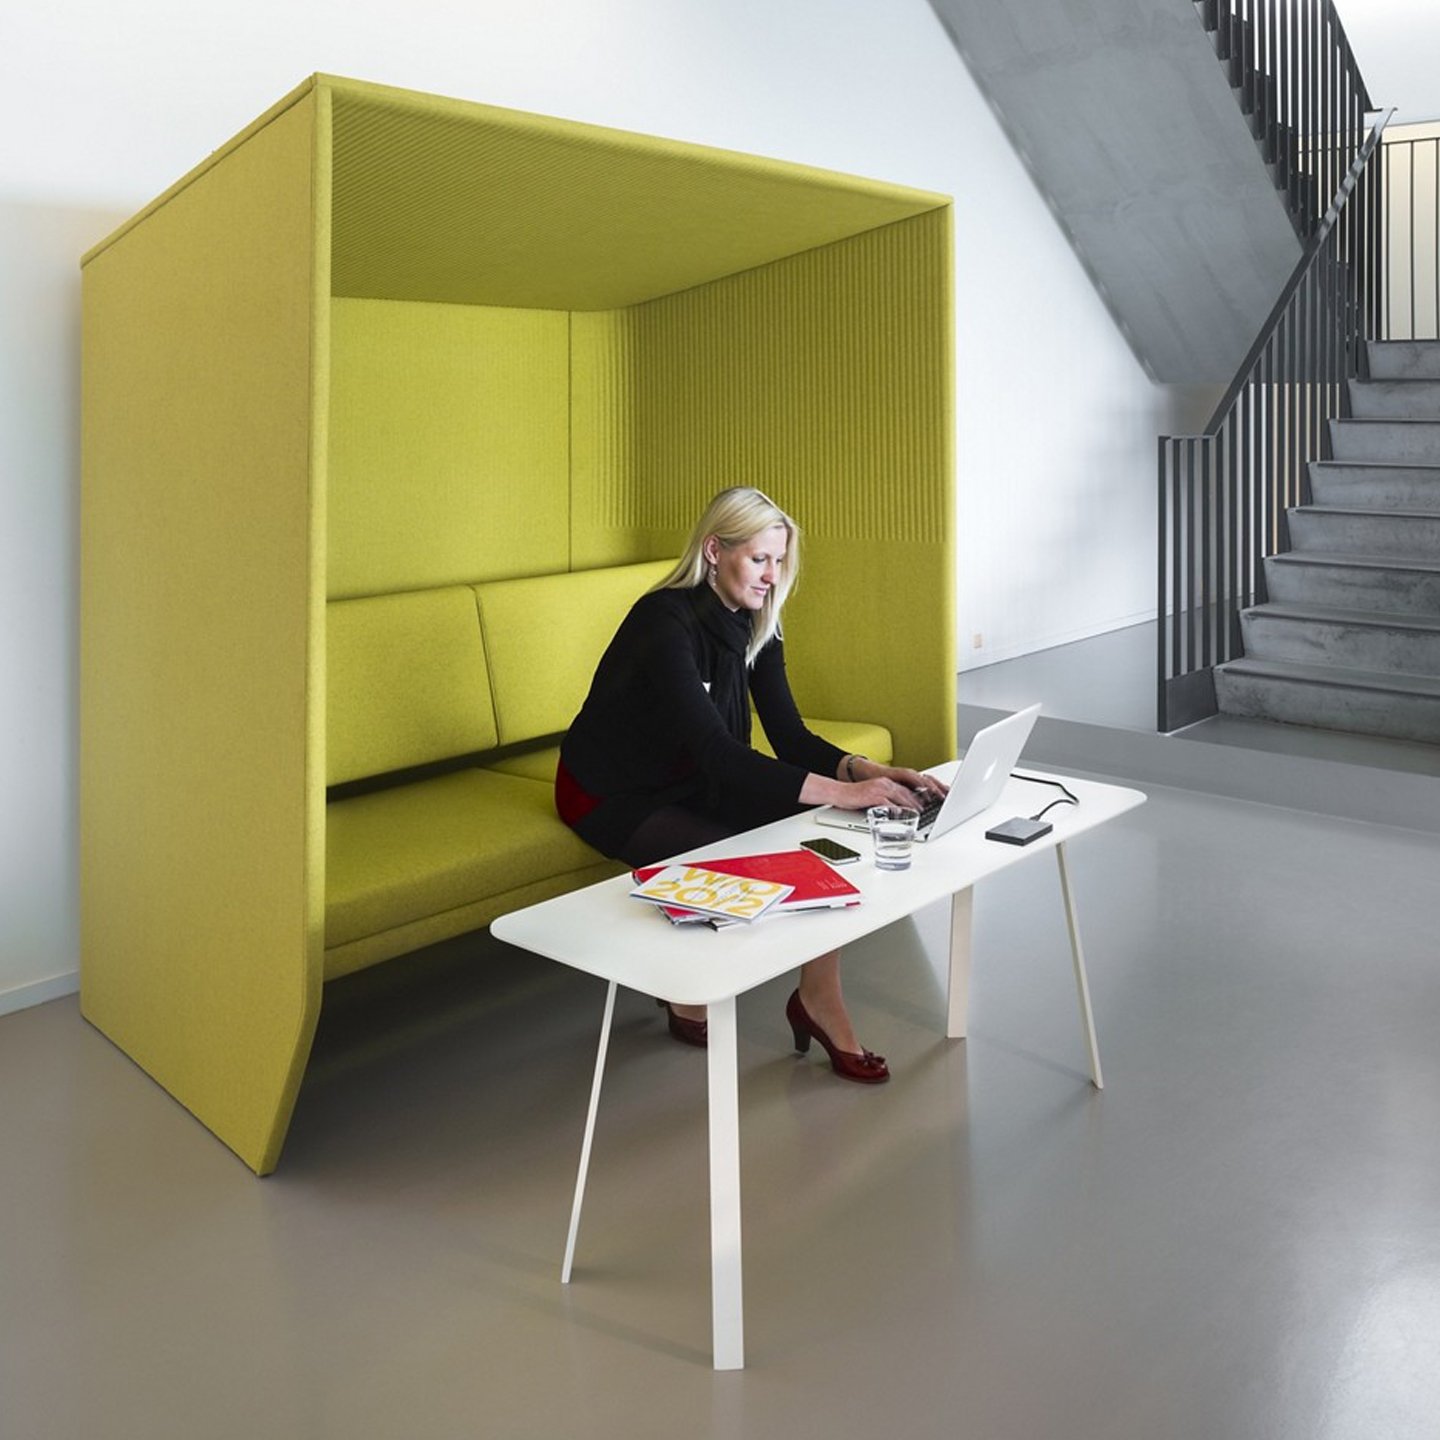 Haworth BuzziHub Booth in lime green color with employee working inside it and at white table next to staircase